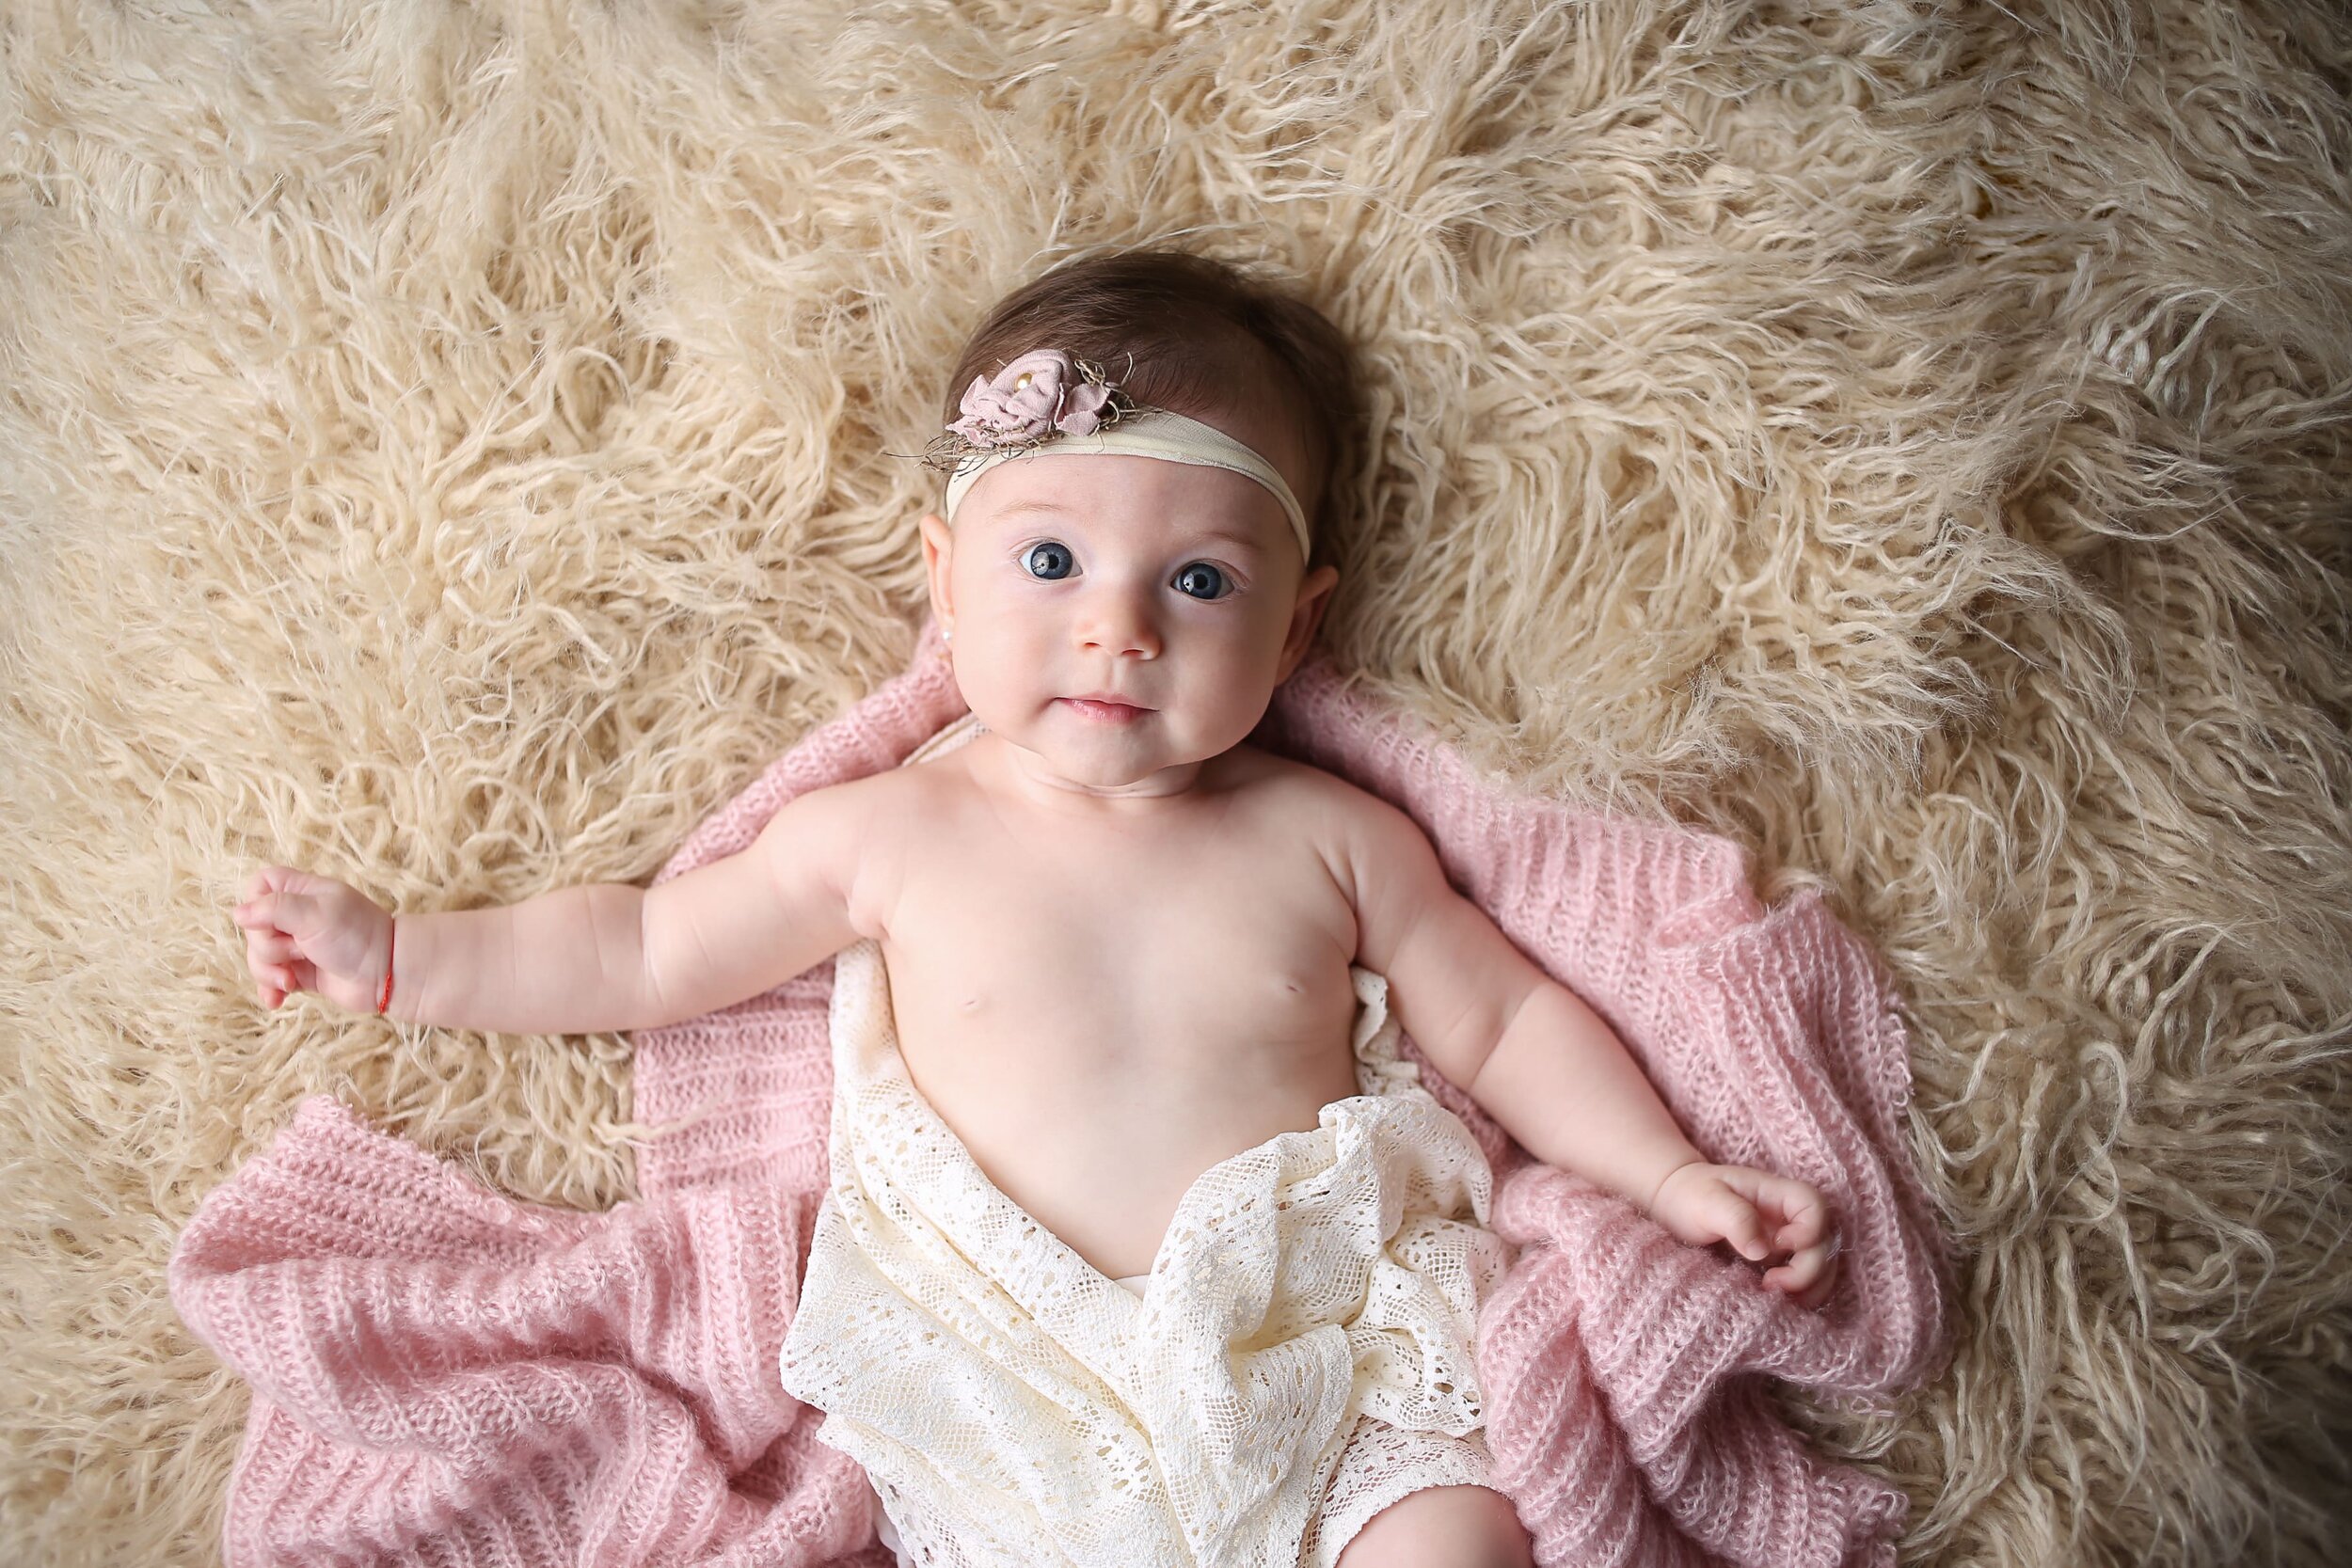  A photograph from above of a sweet baby girl in a flowered headband, looking up with a happy face as she is wrapped in a lacy cover and pink blanket, reaching a new milestone by Photography by L Rose, a baby photographer in San Diego California 